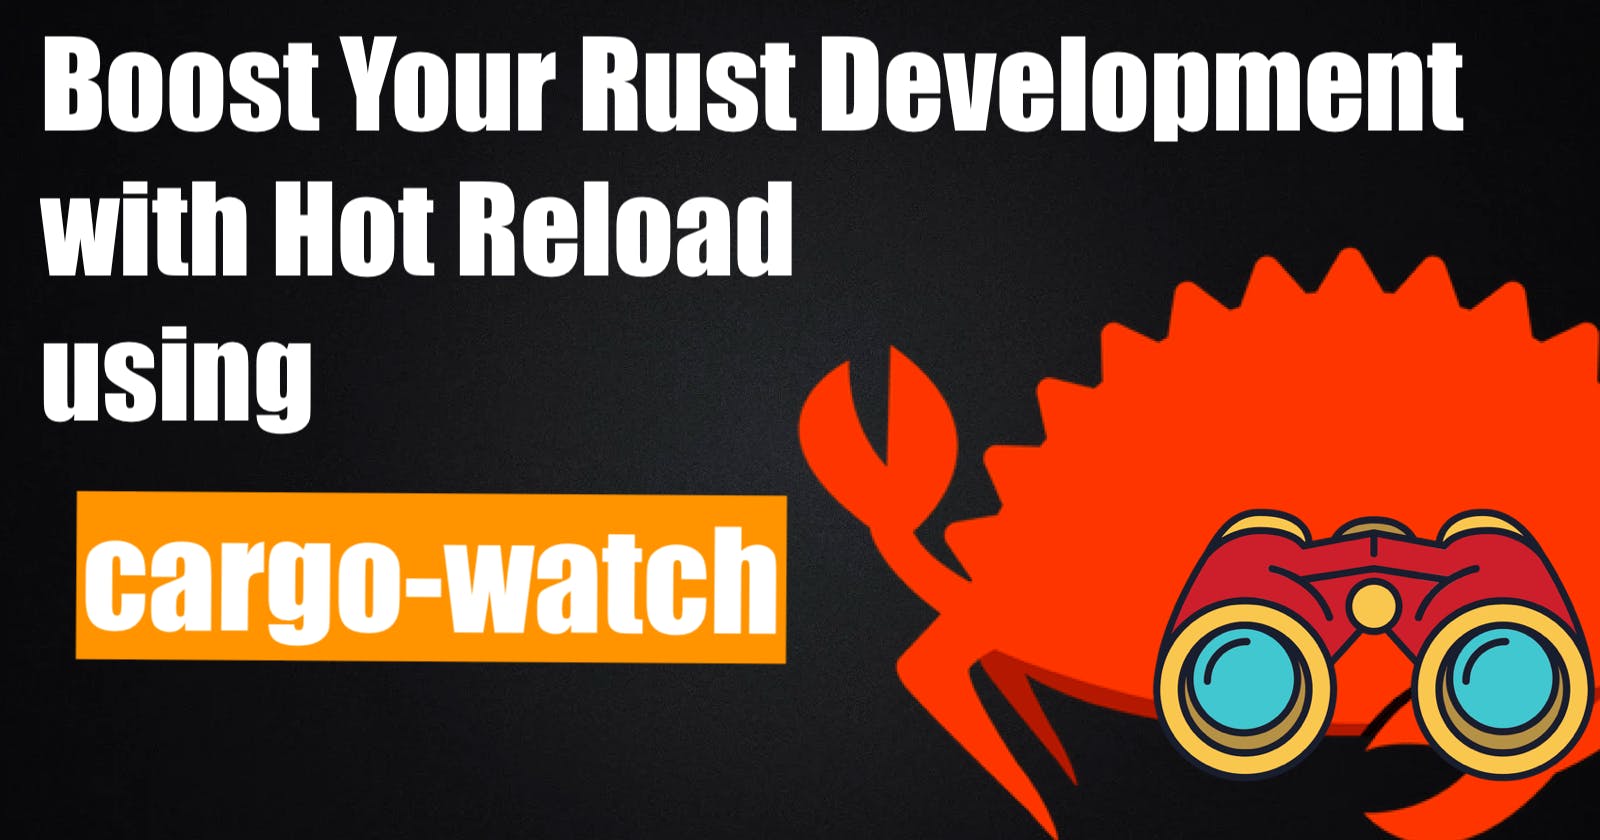 Boost Your Rust 🦀 Development with Hot Reload using cargo-watch